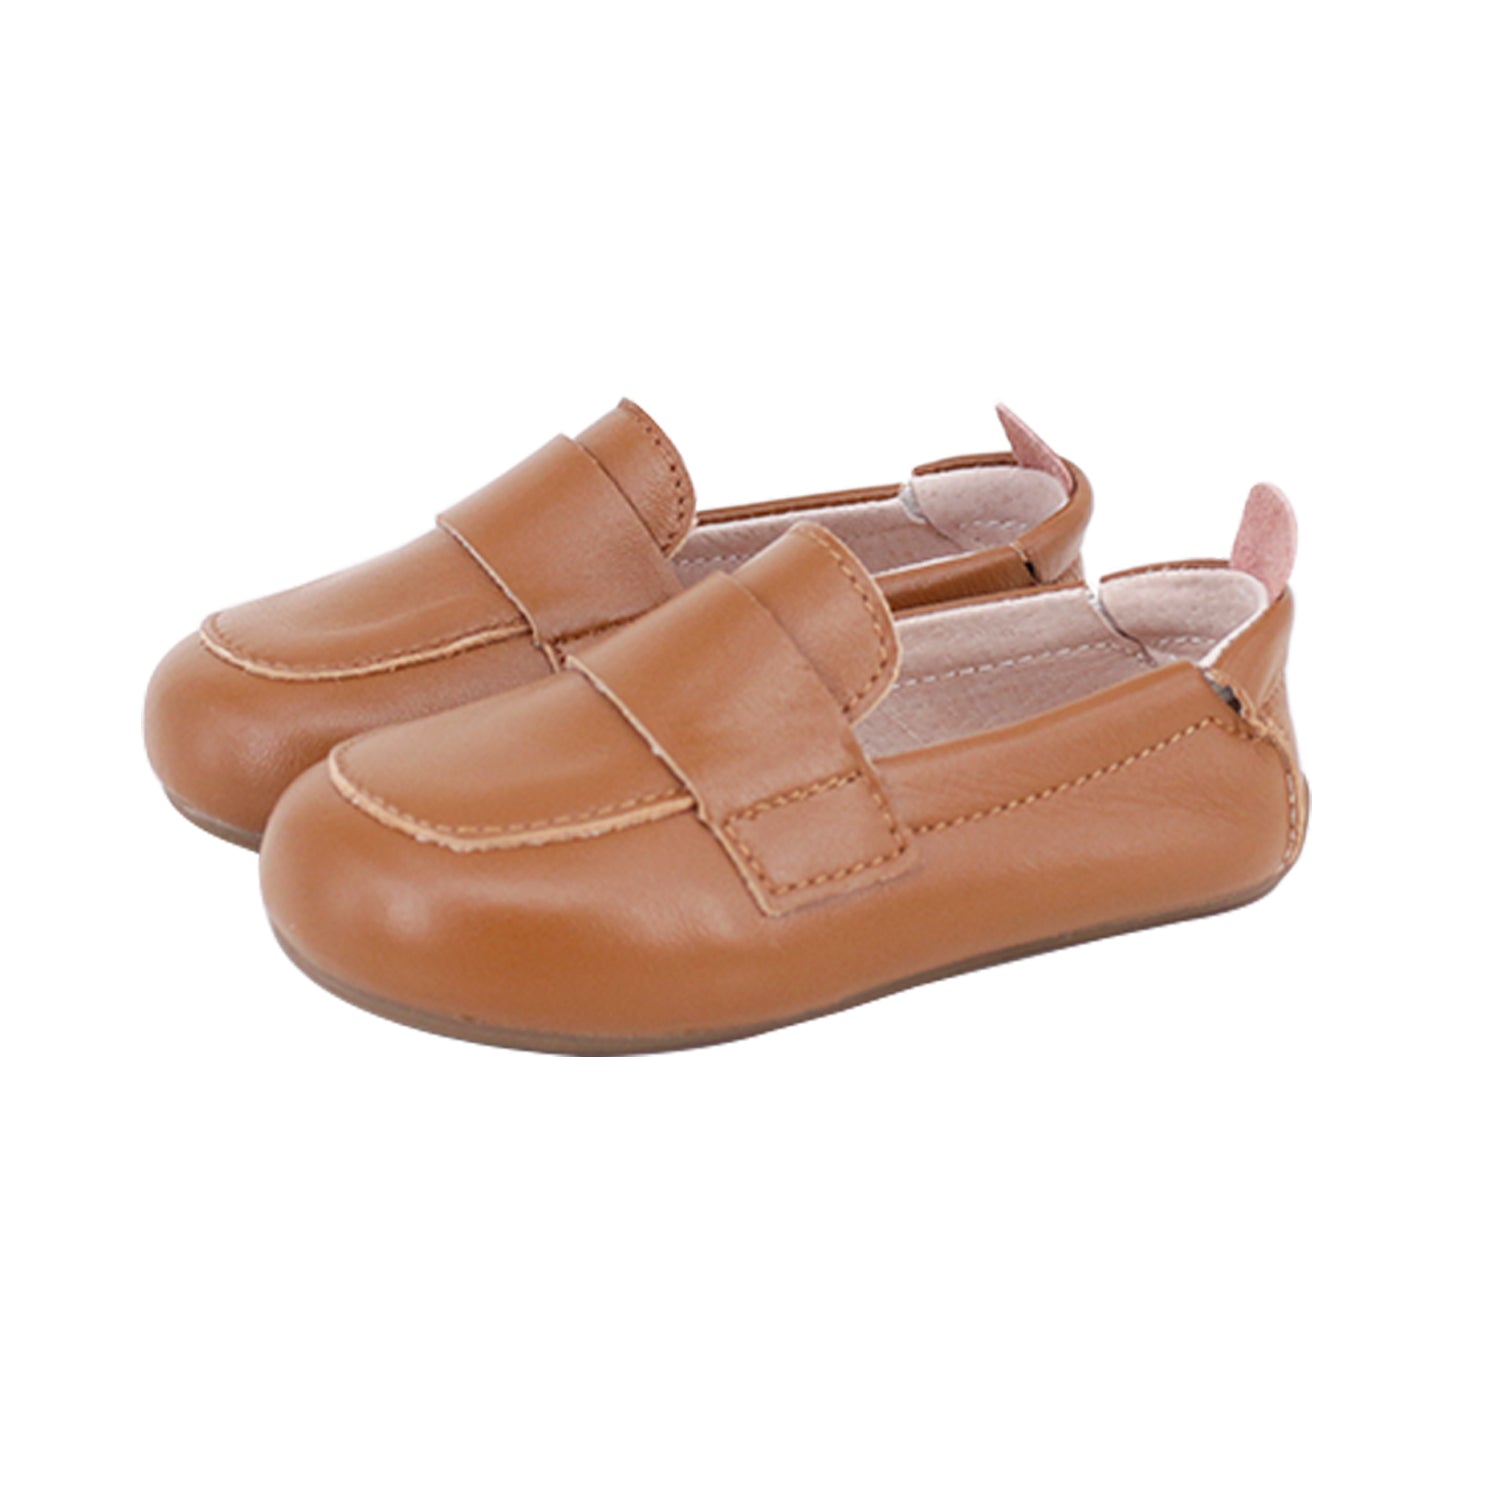 Oliver Leather & Shoes Pre Bunting Shoes Walker Baby Kids | AU - Loafers Booties, Socks SKEANIE for Tan |